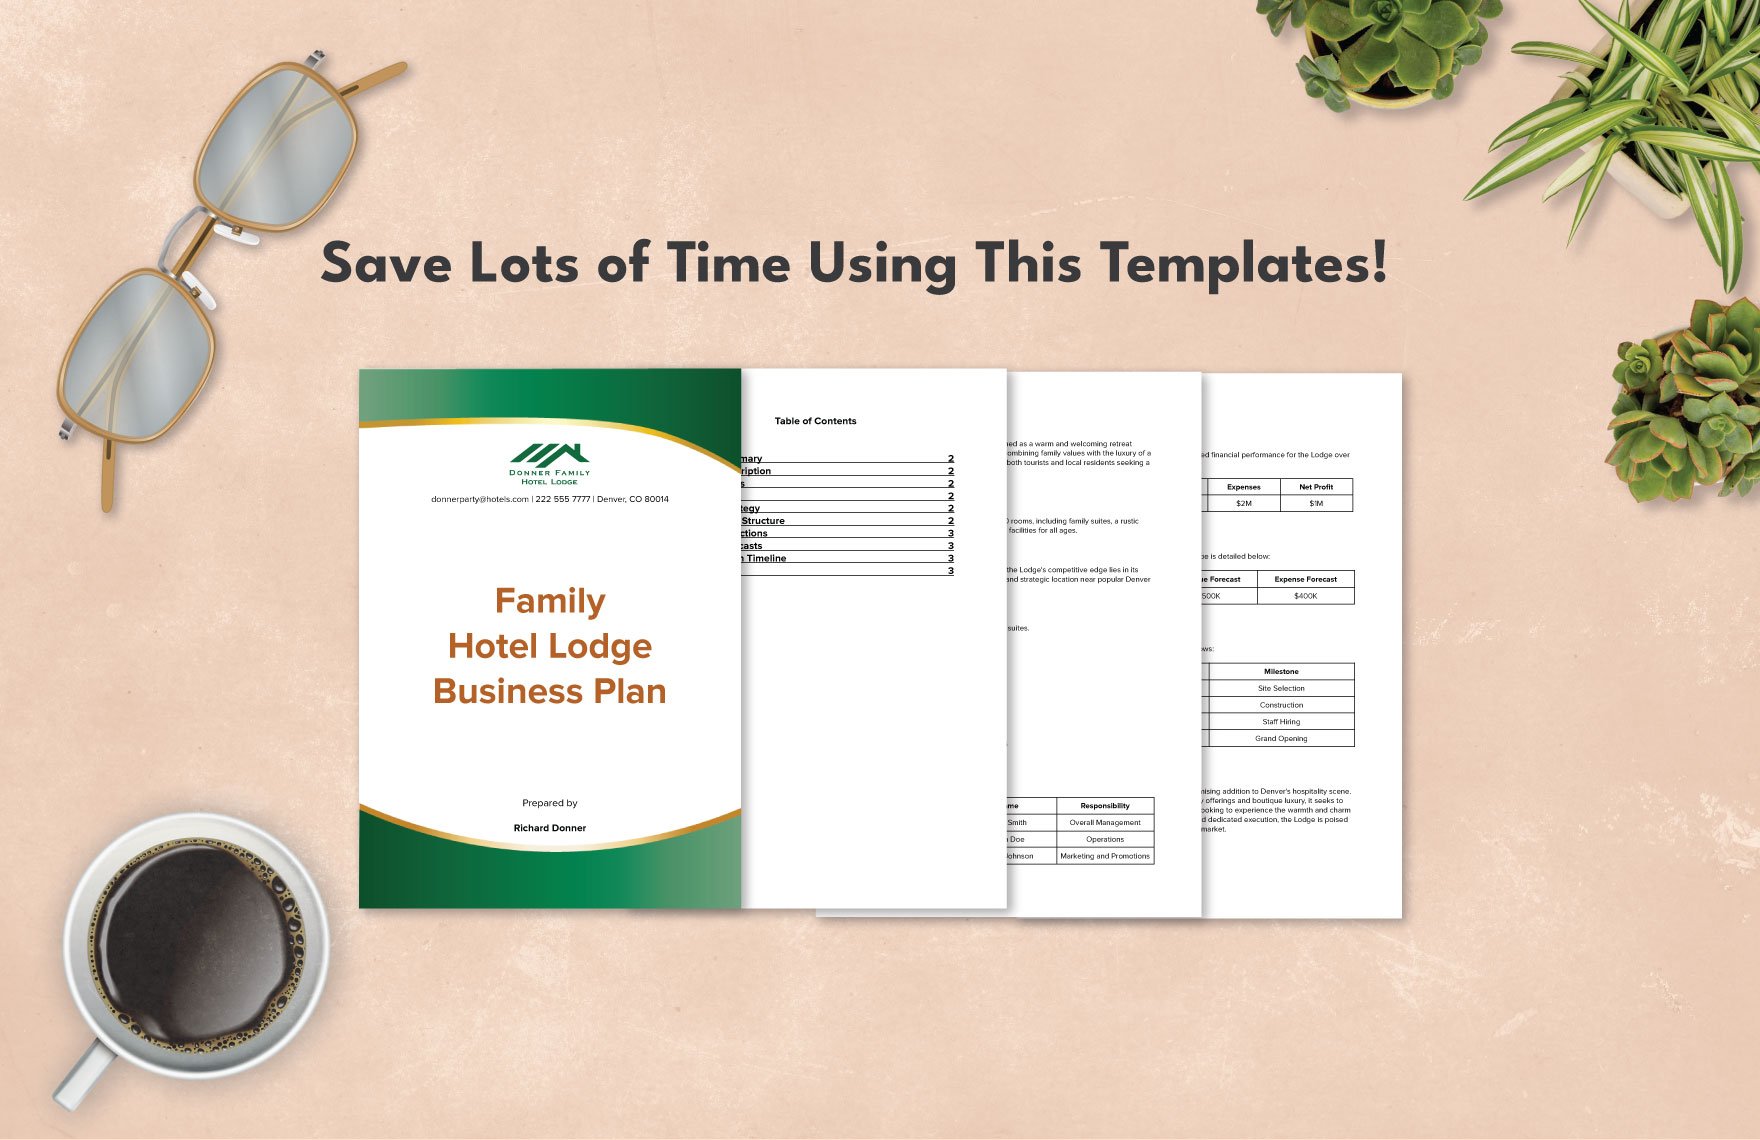 Family Hotel Lodge Business Plan Sample Template